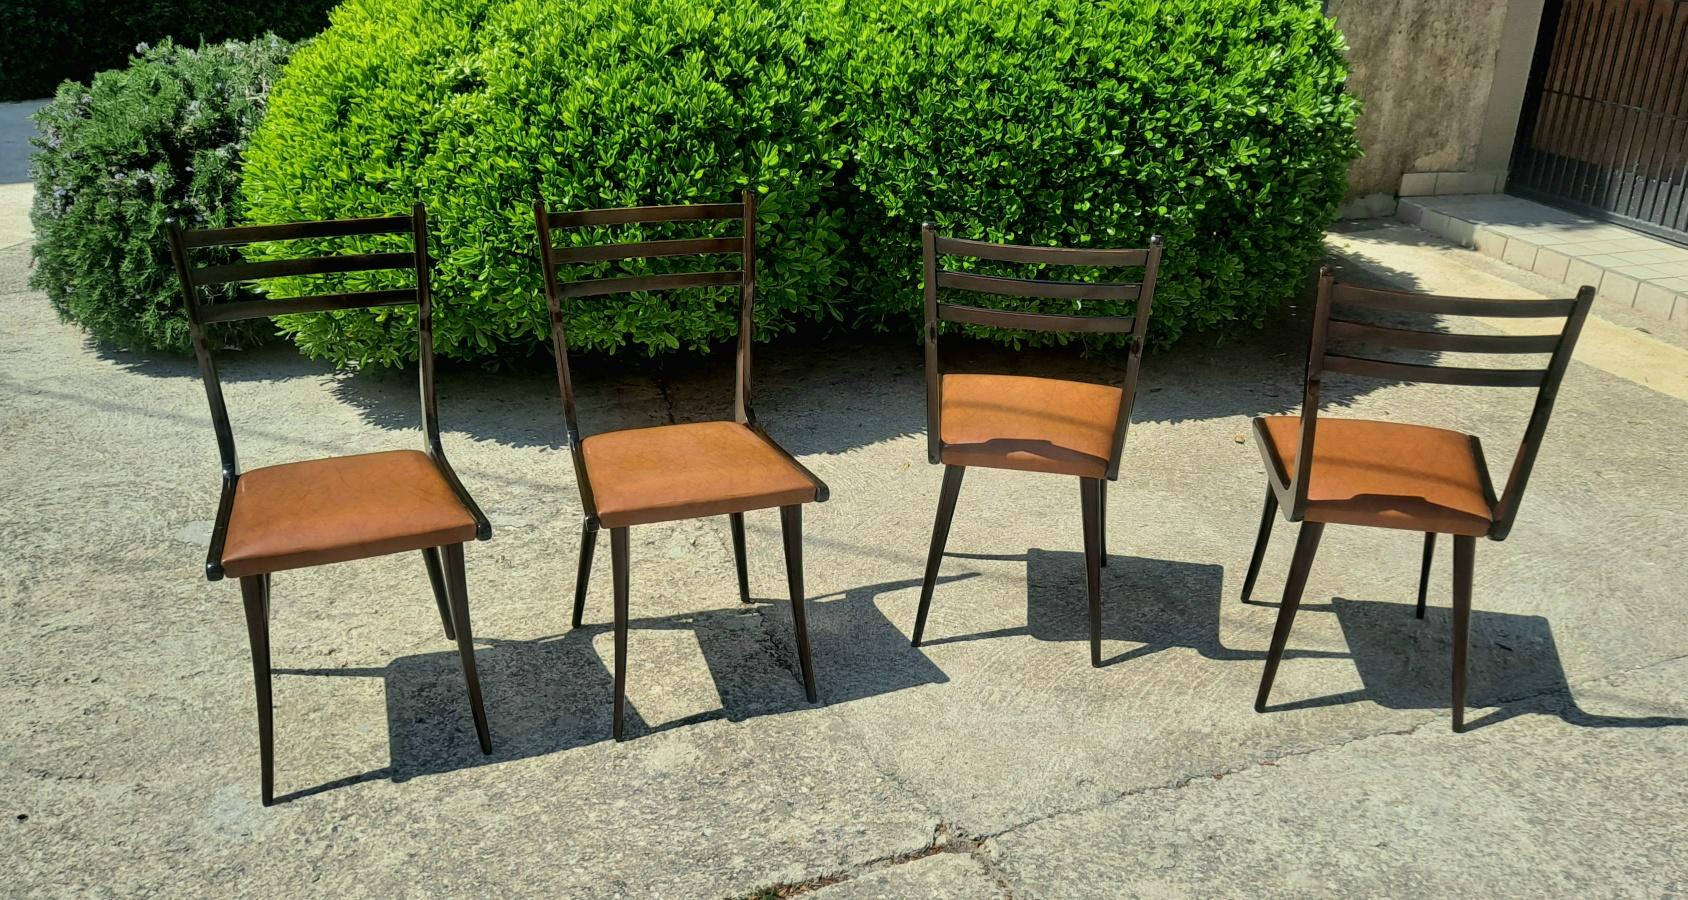 This is a original set of 4 chairs in style of Gio Ponti.